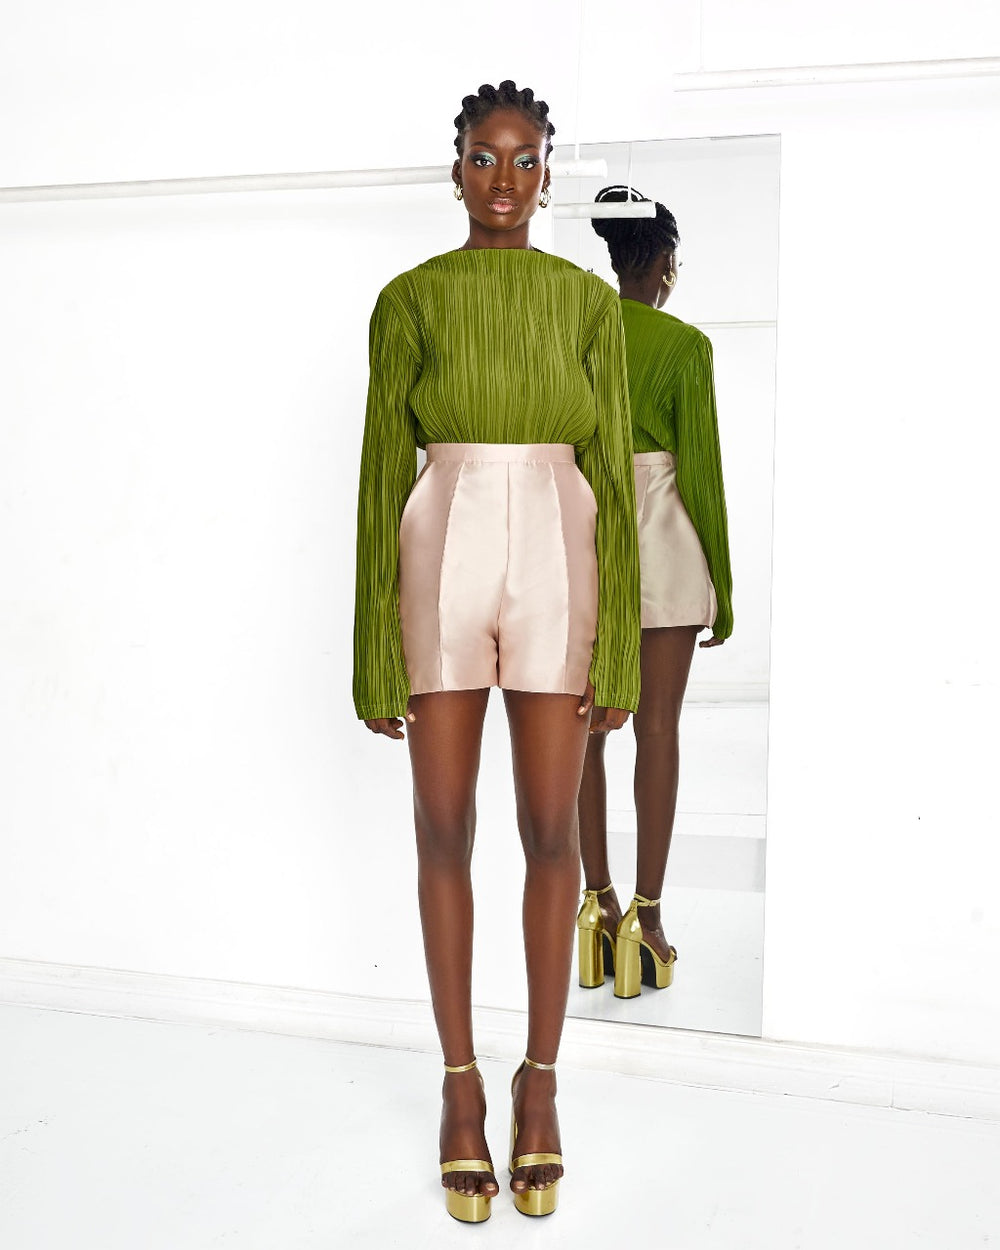 A model wearing an Olive top and Nude colored shorts in a white room